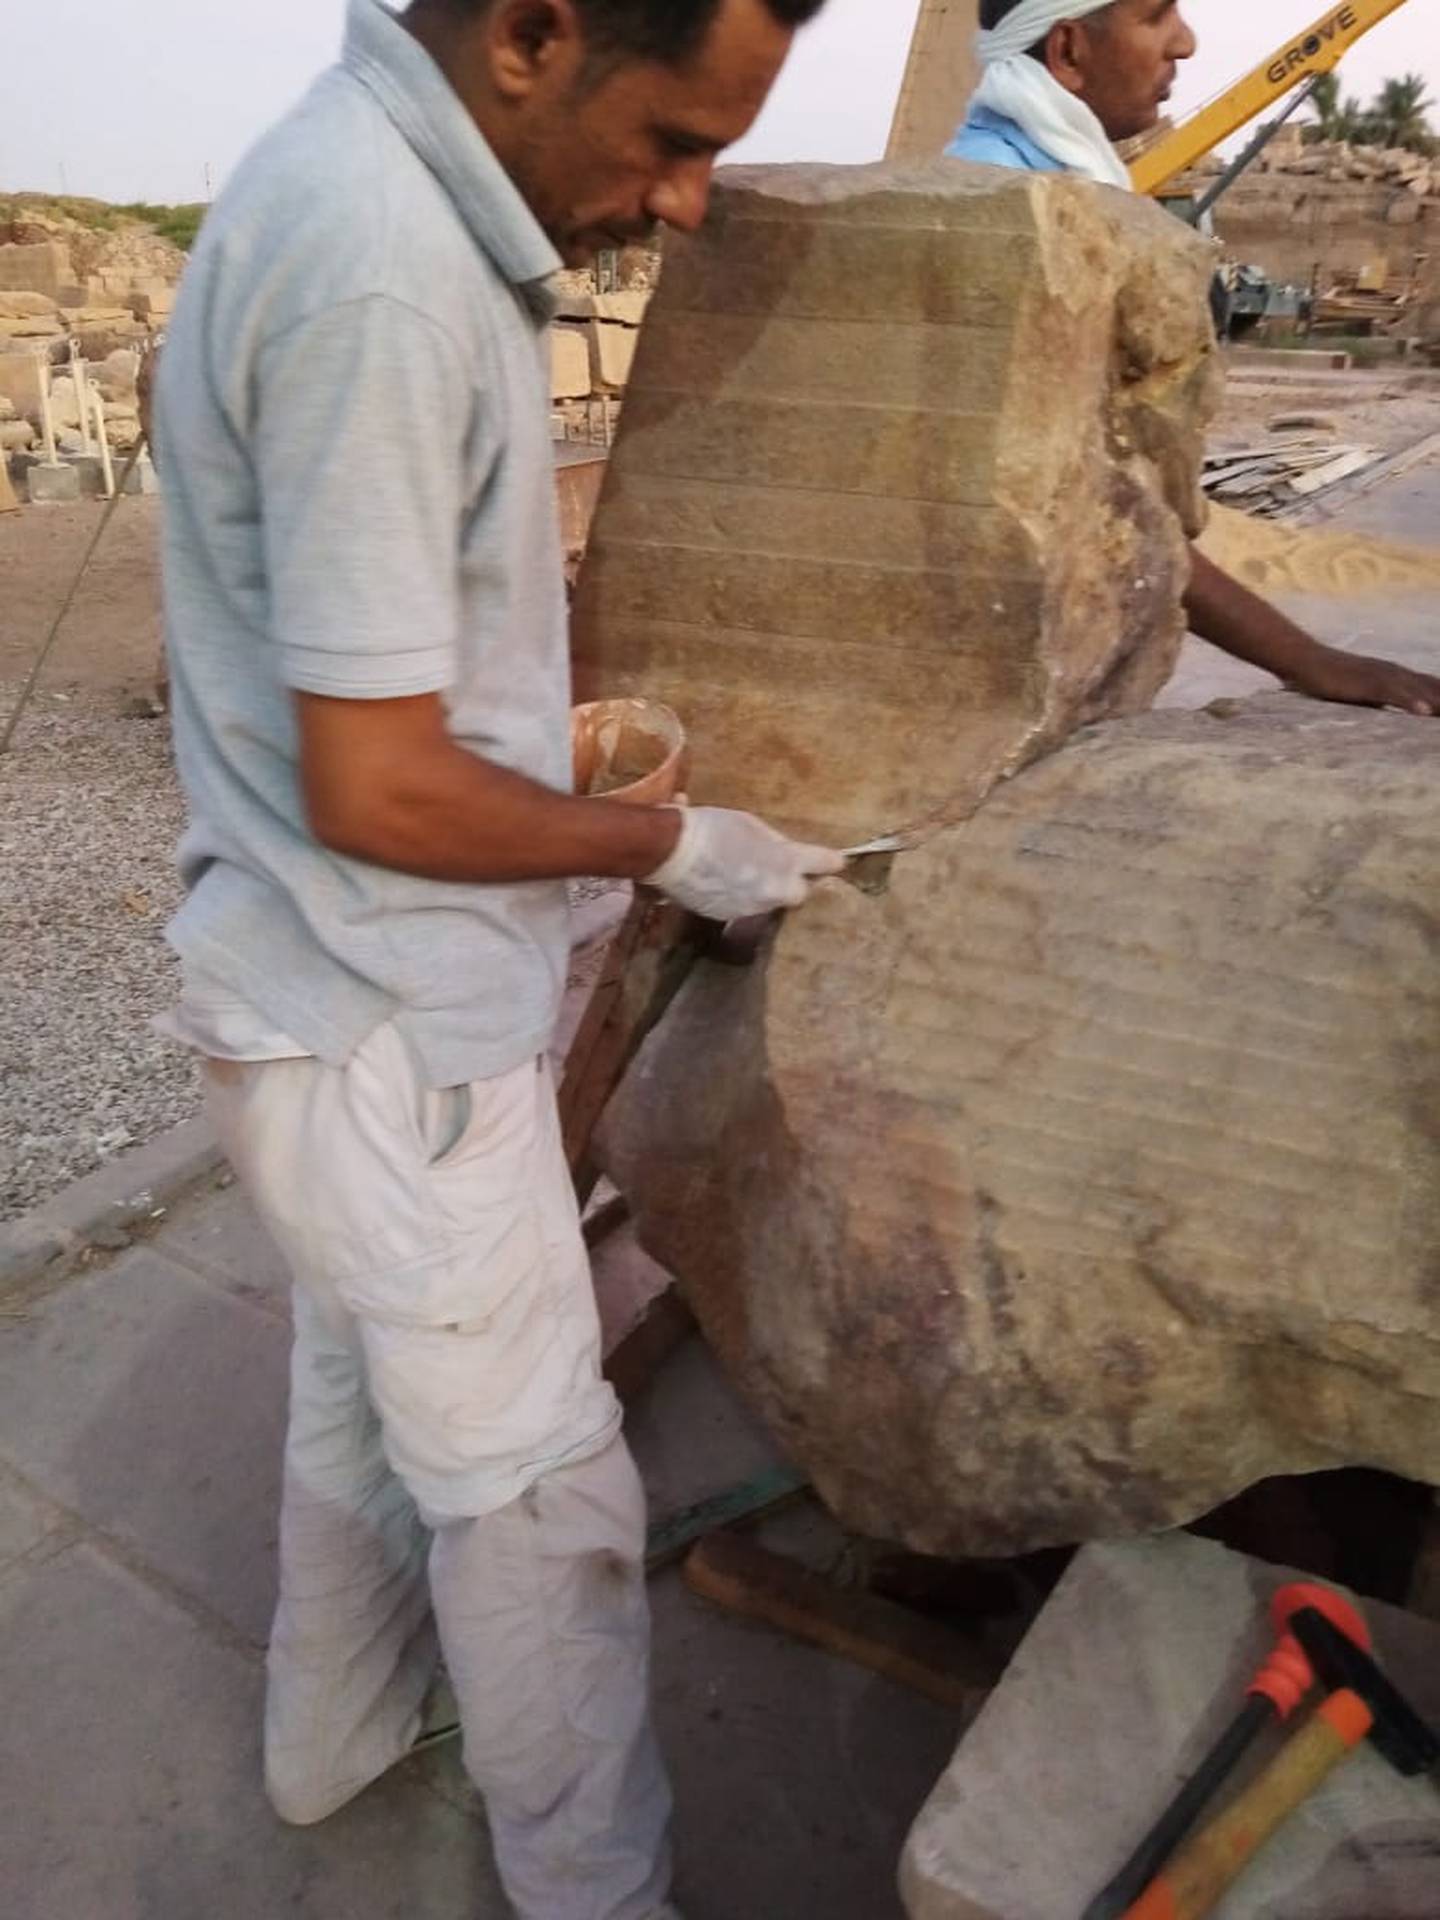 An Egyptian restorer working on the statue of Thutmose II in Luxor's famed Karnak Temple. Photo: Egypt's Ministry of Tourism and Antiquities